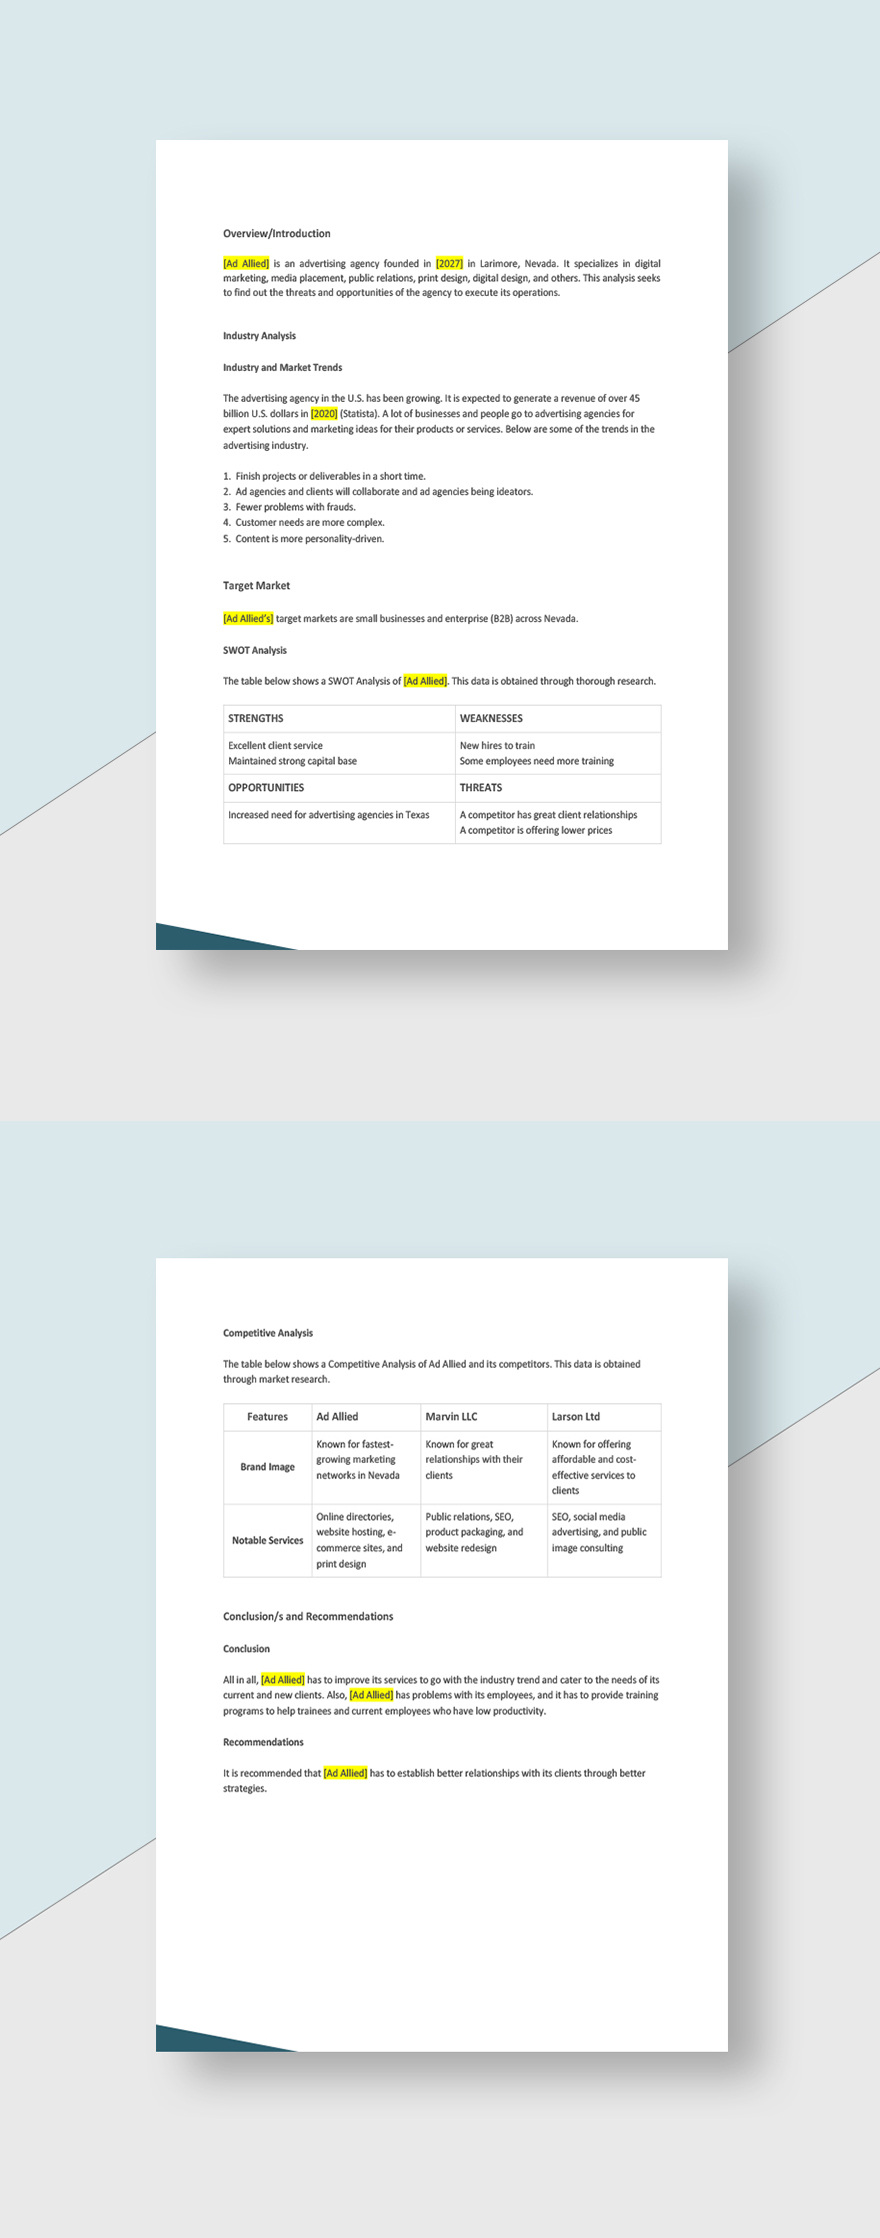 Advertising Agency Industry Analysis Template